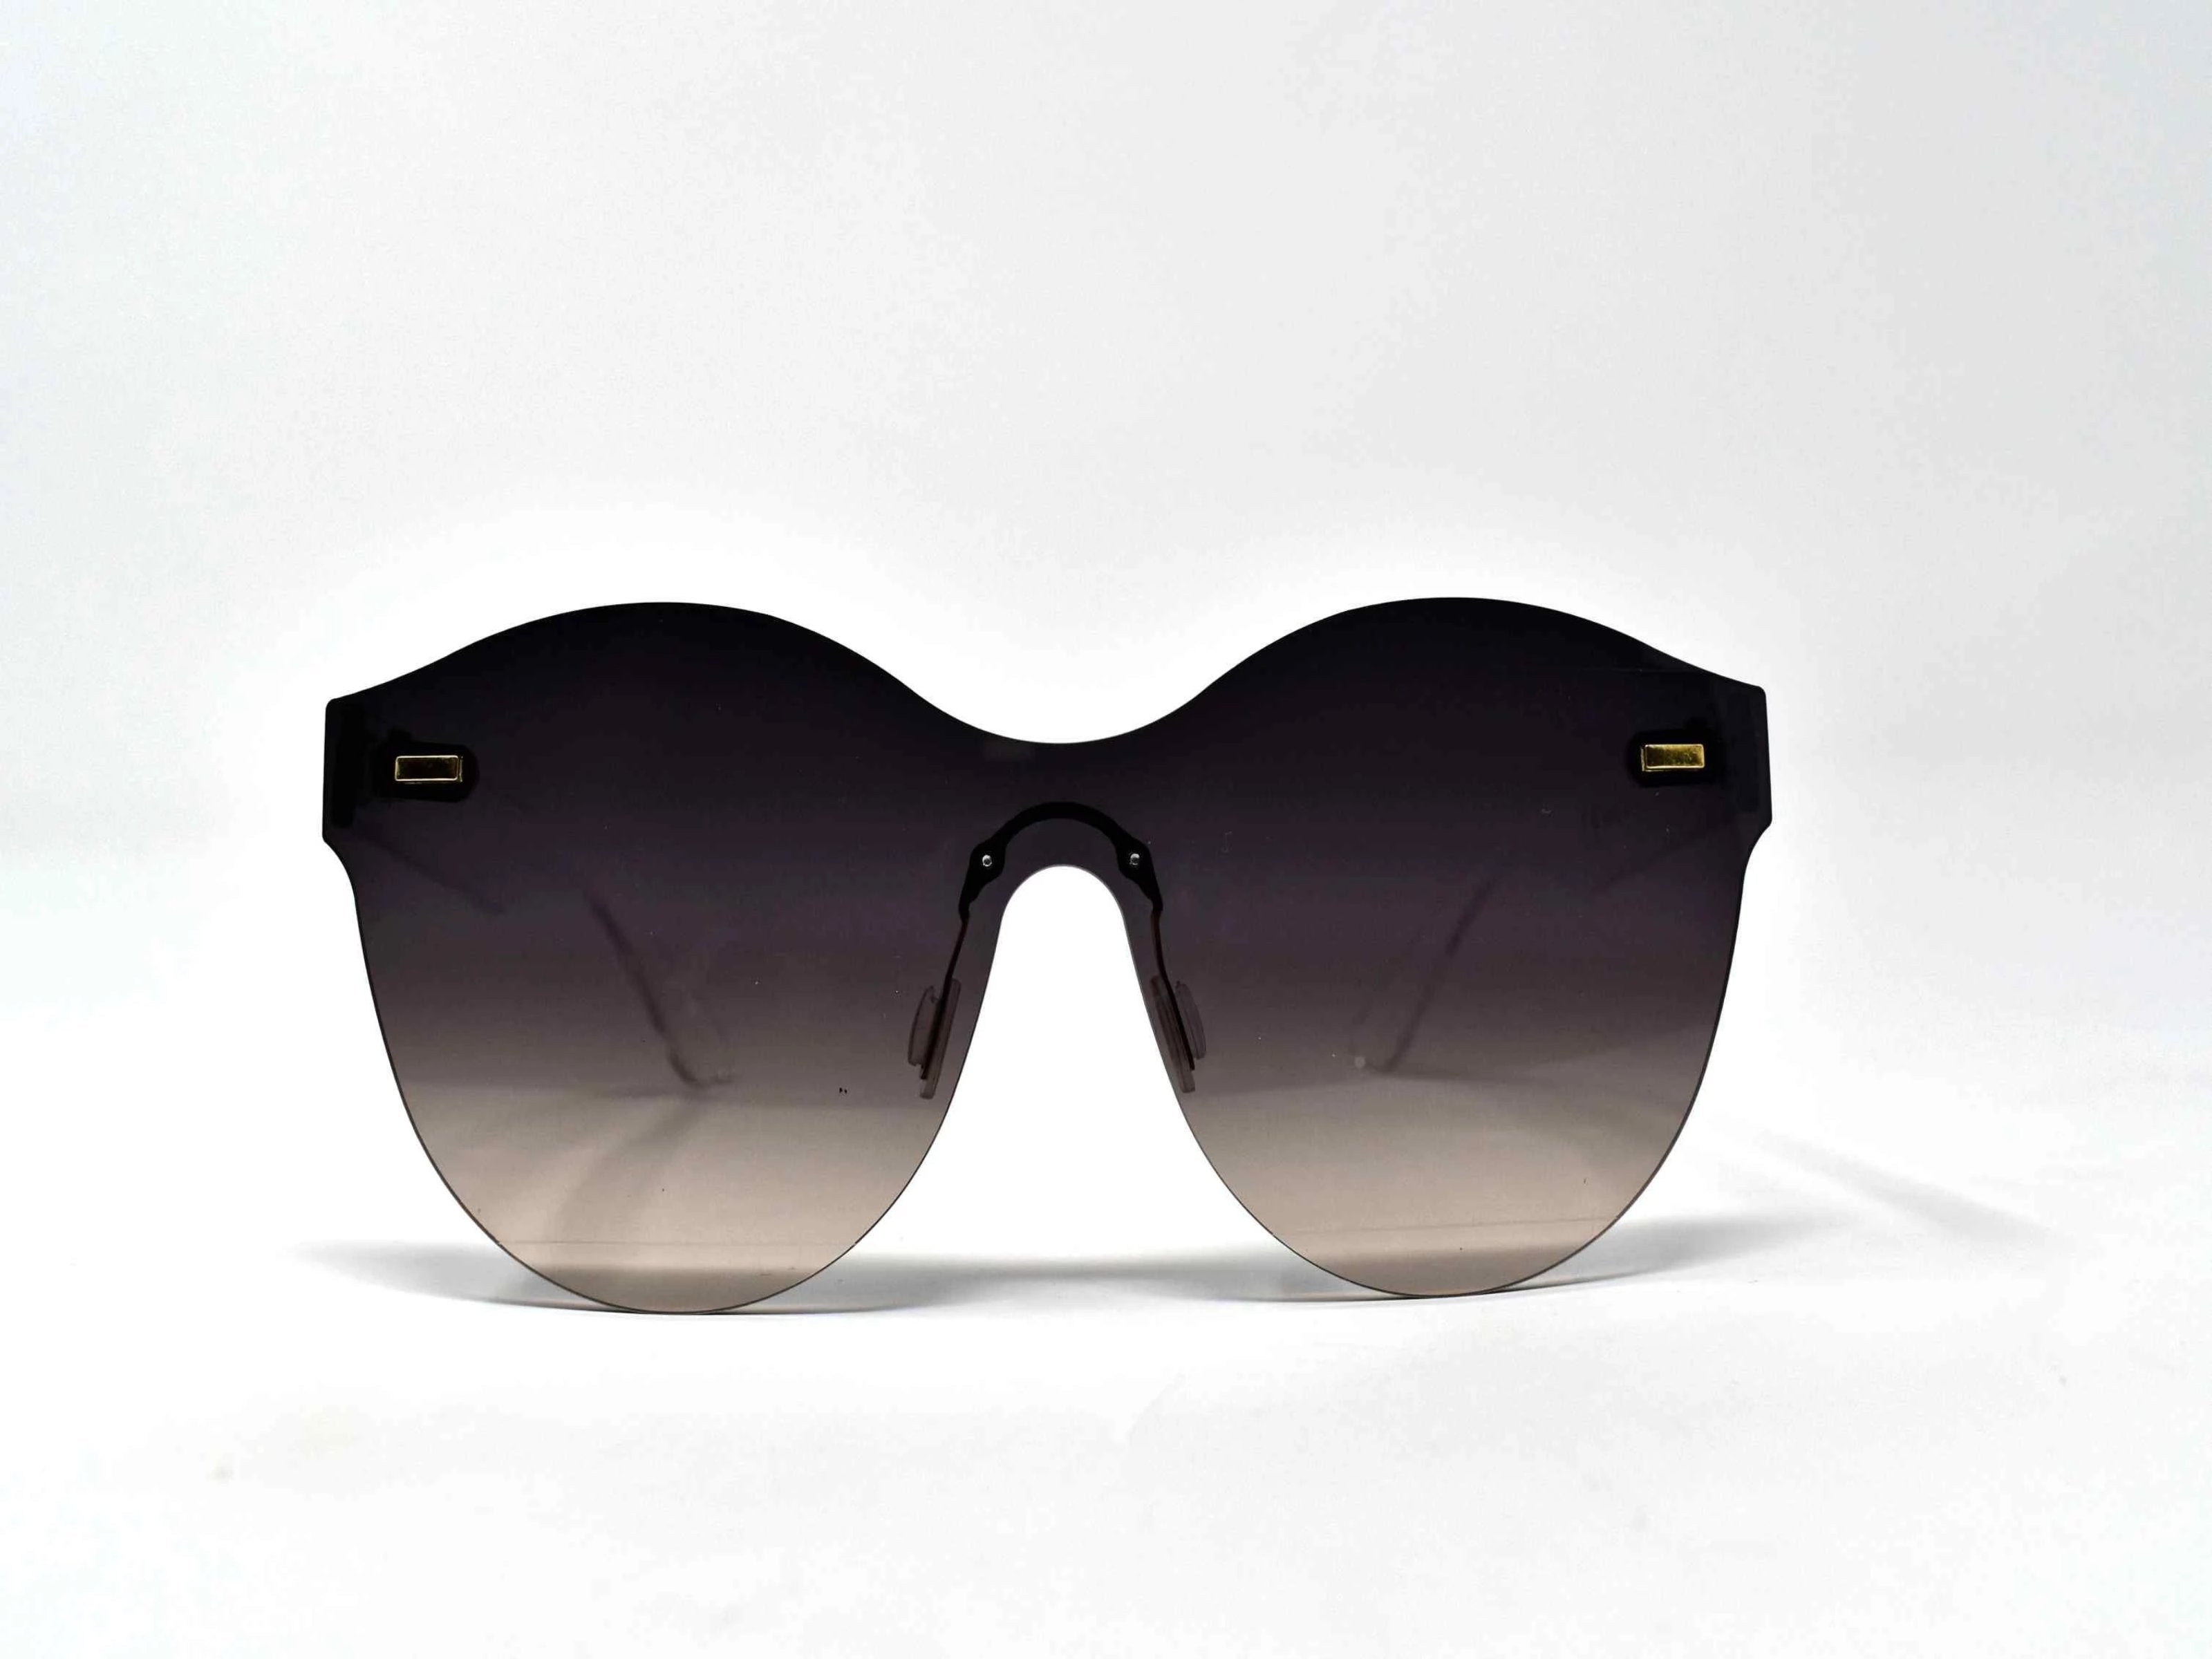 Its just a good vibe in these sage no rim sunglass frames with a black to gray ombre lens.